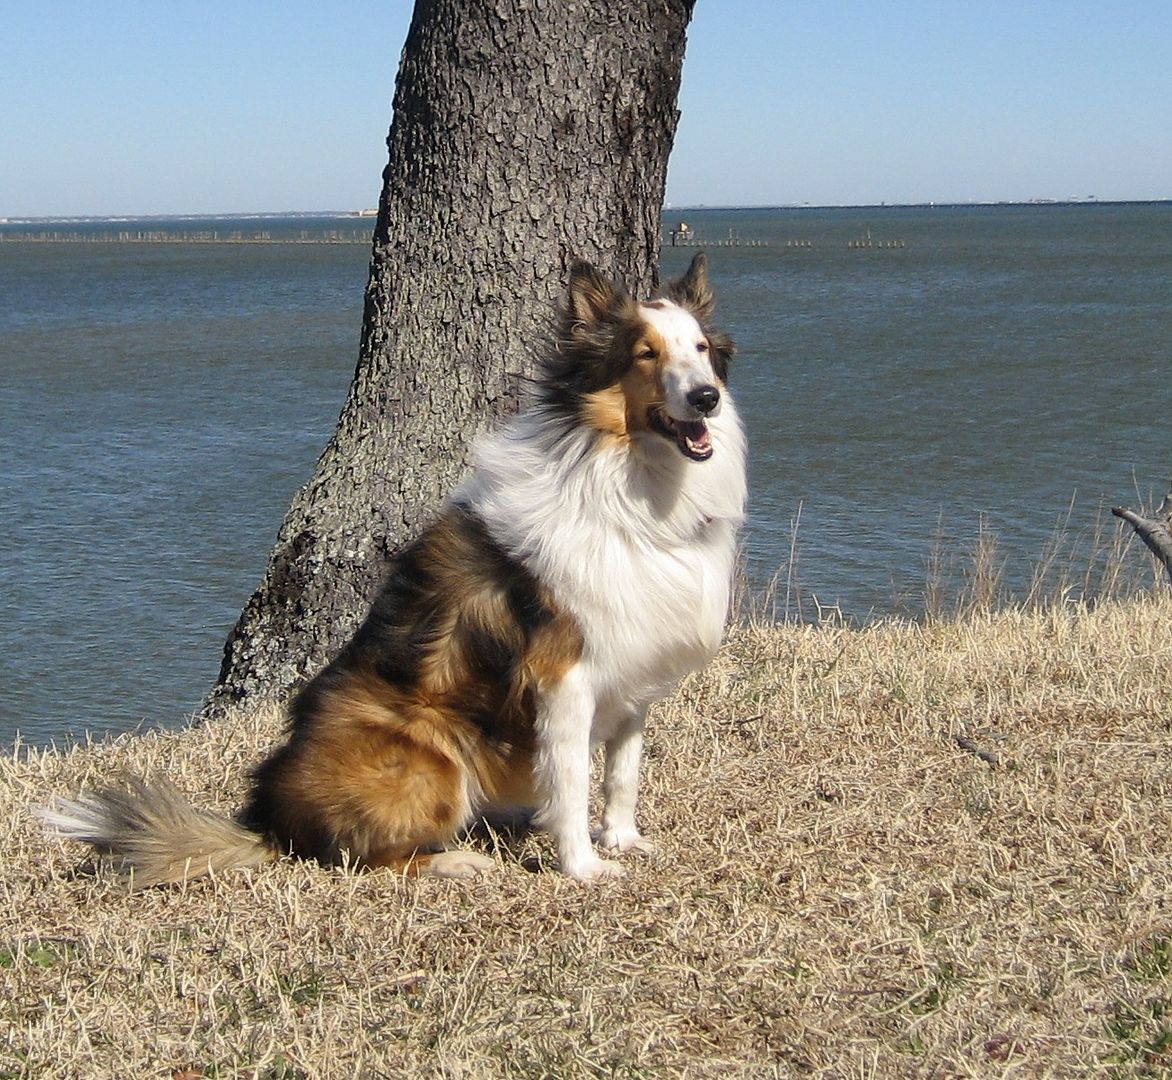 Teddy enjoys the blustery, beautiful day.